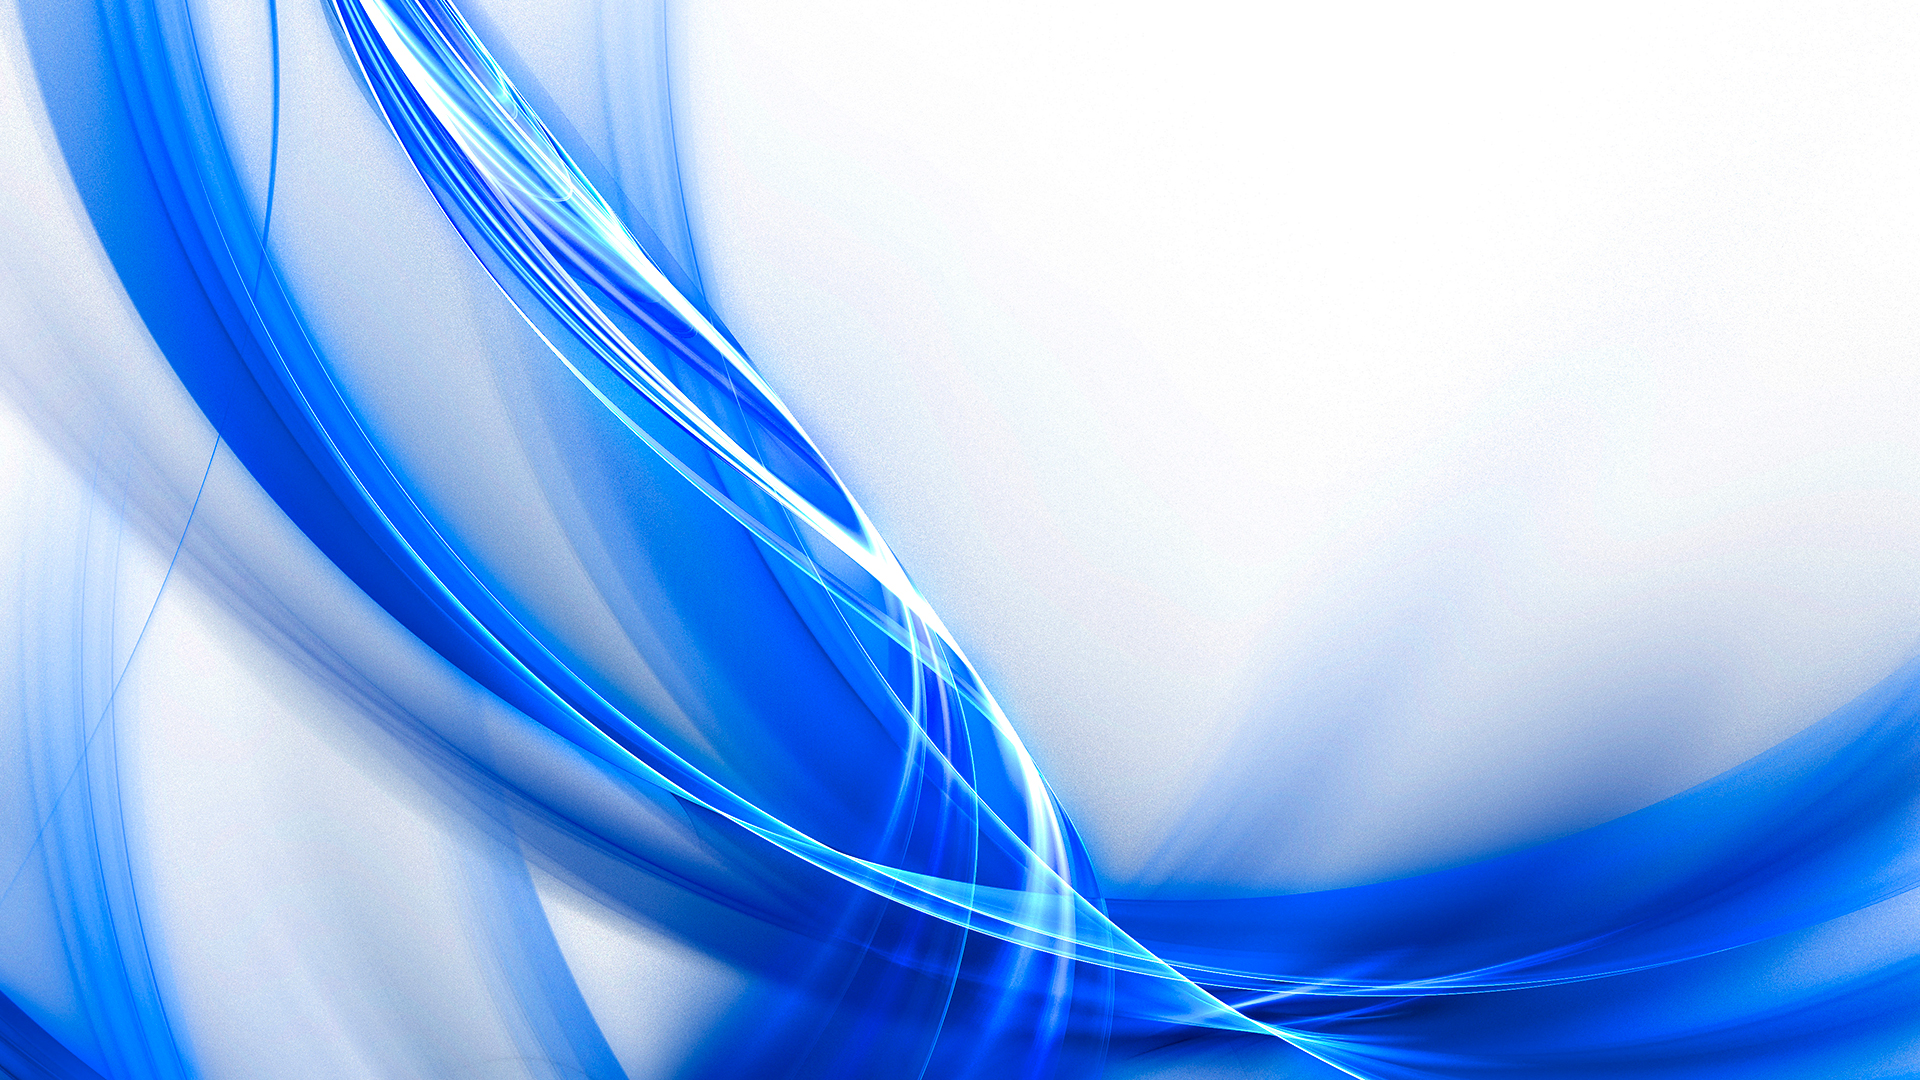 light blue and white background hd